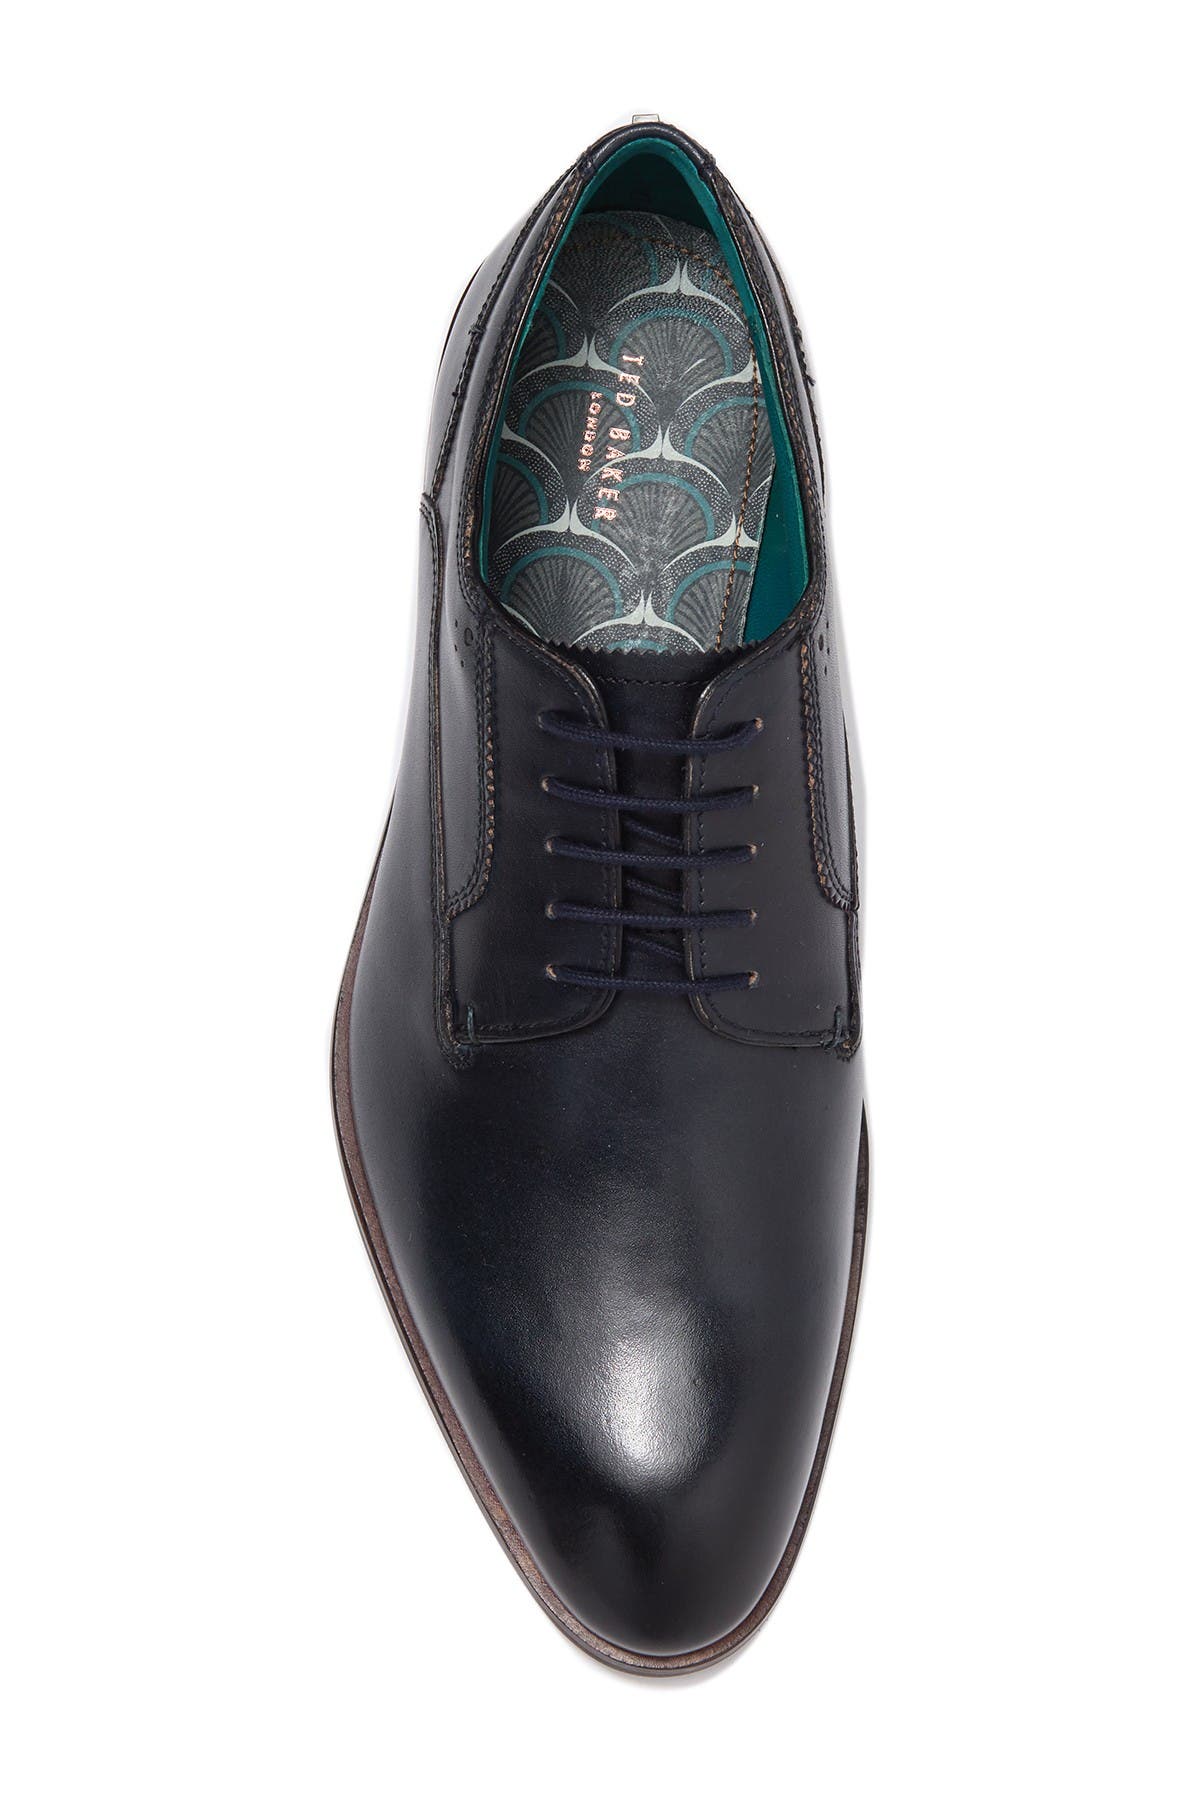 Ted Baker London | Parals Leather Derby 